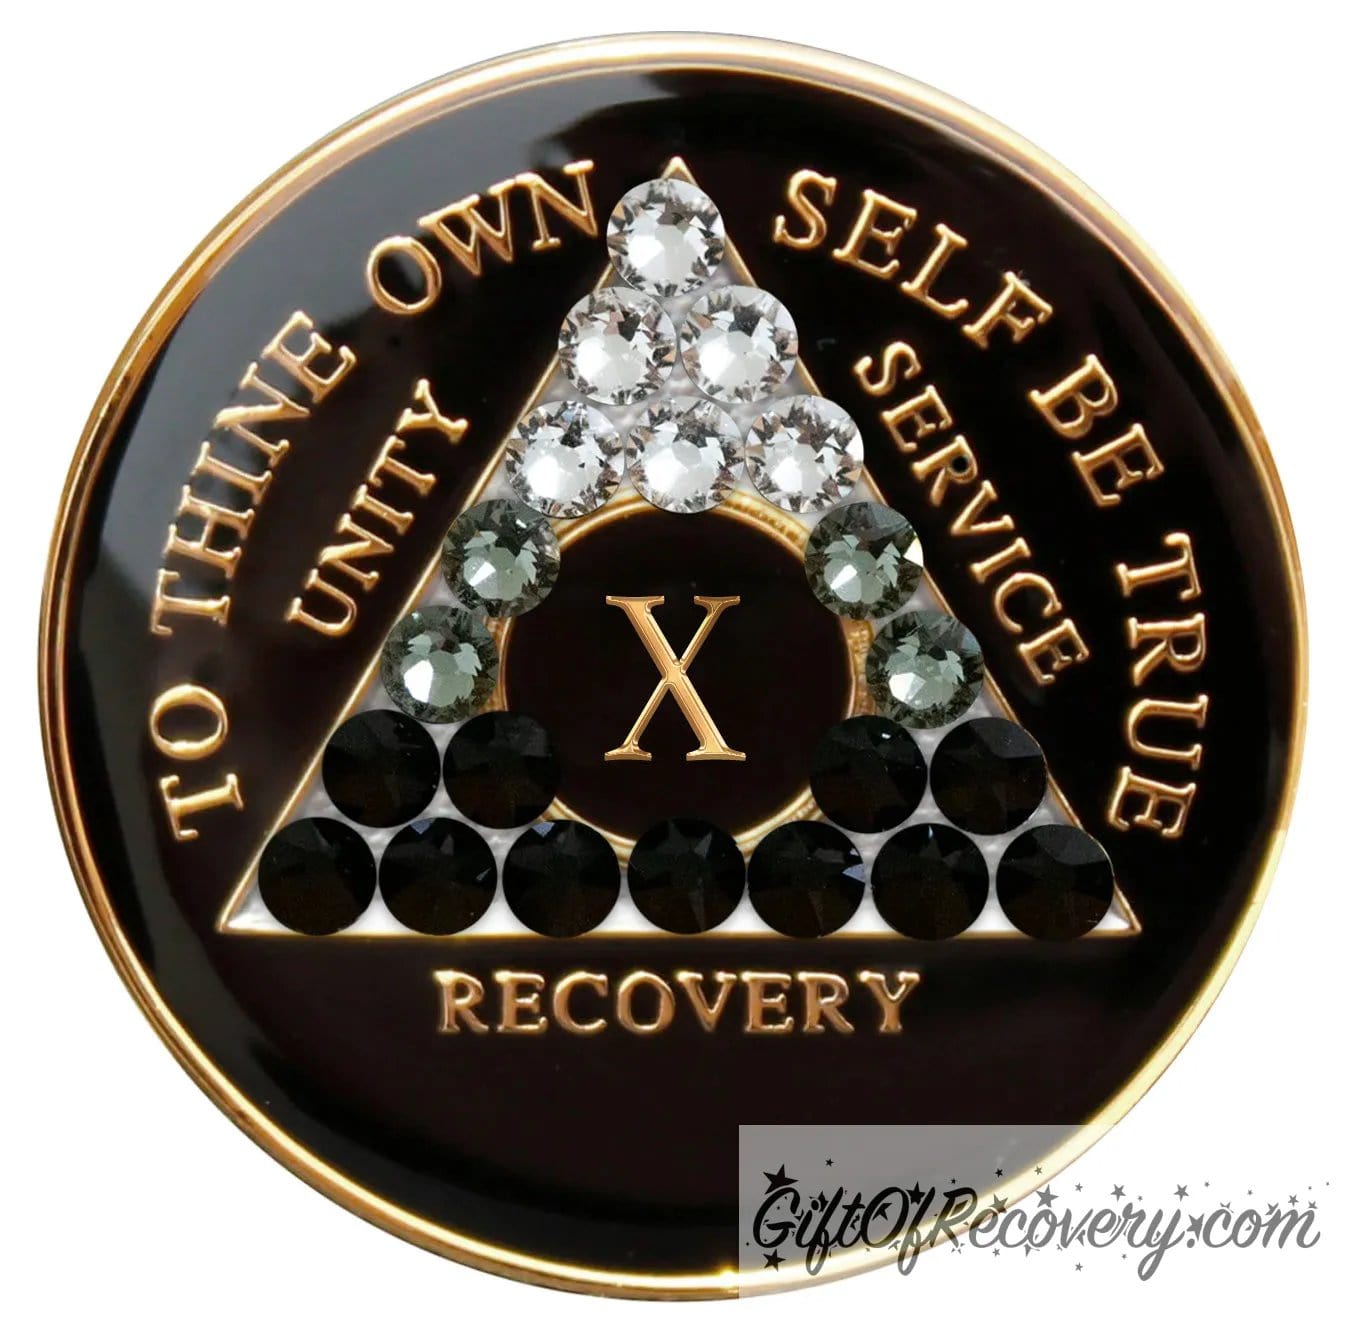 10 year AA recovery medallion black onyx with 21 genuine crystals ranging from clear to grey, to black, representing the transformation of the recovery journey, the AA moto along with unity, service, recovery, roman numeral, and the outer rim of medallion are embossed with 14k gold plated bras, the medallion is sealed in resin for a glossy finish.